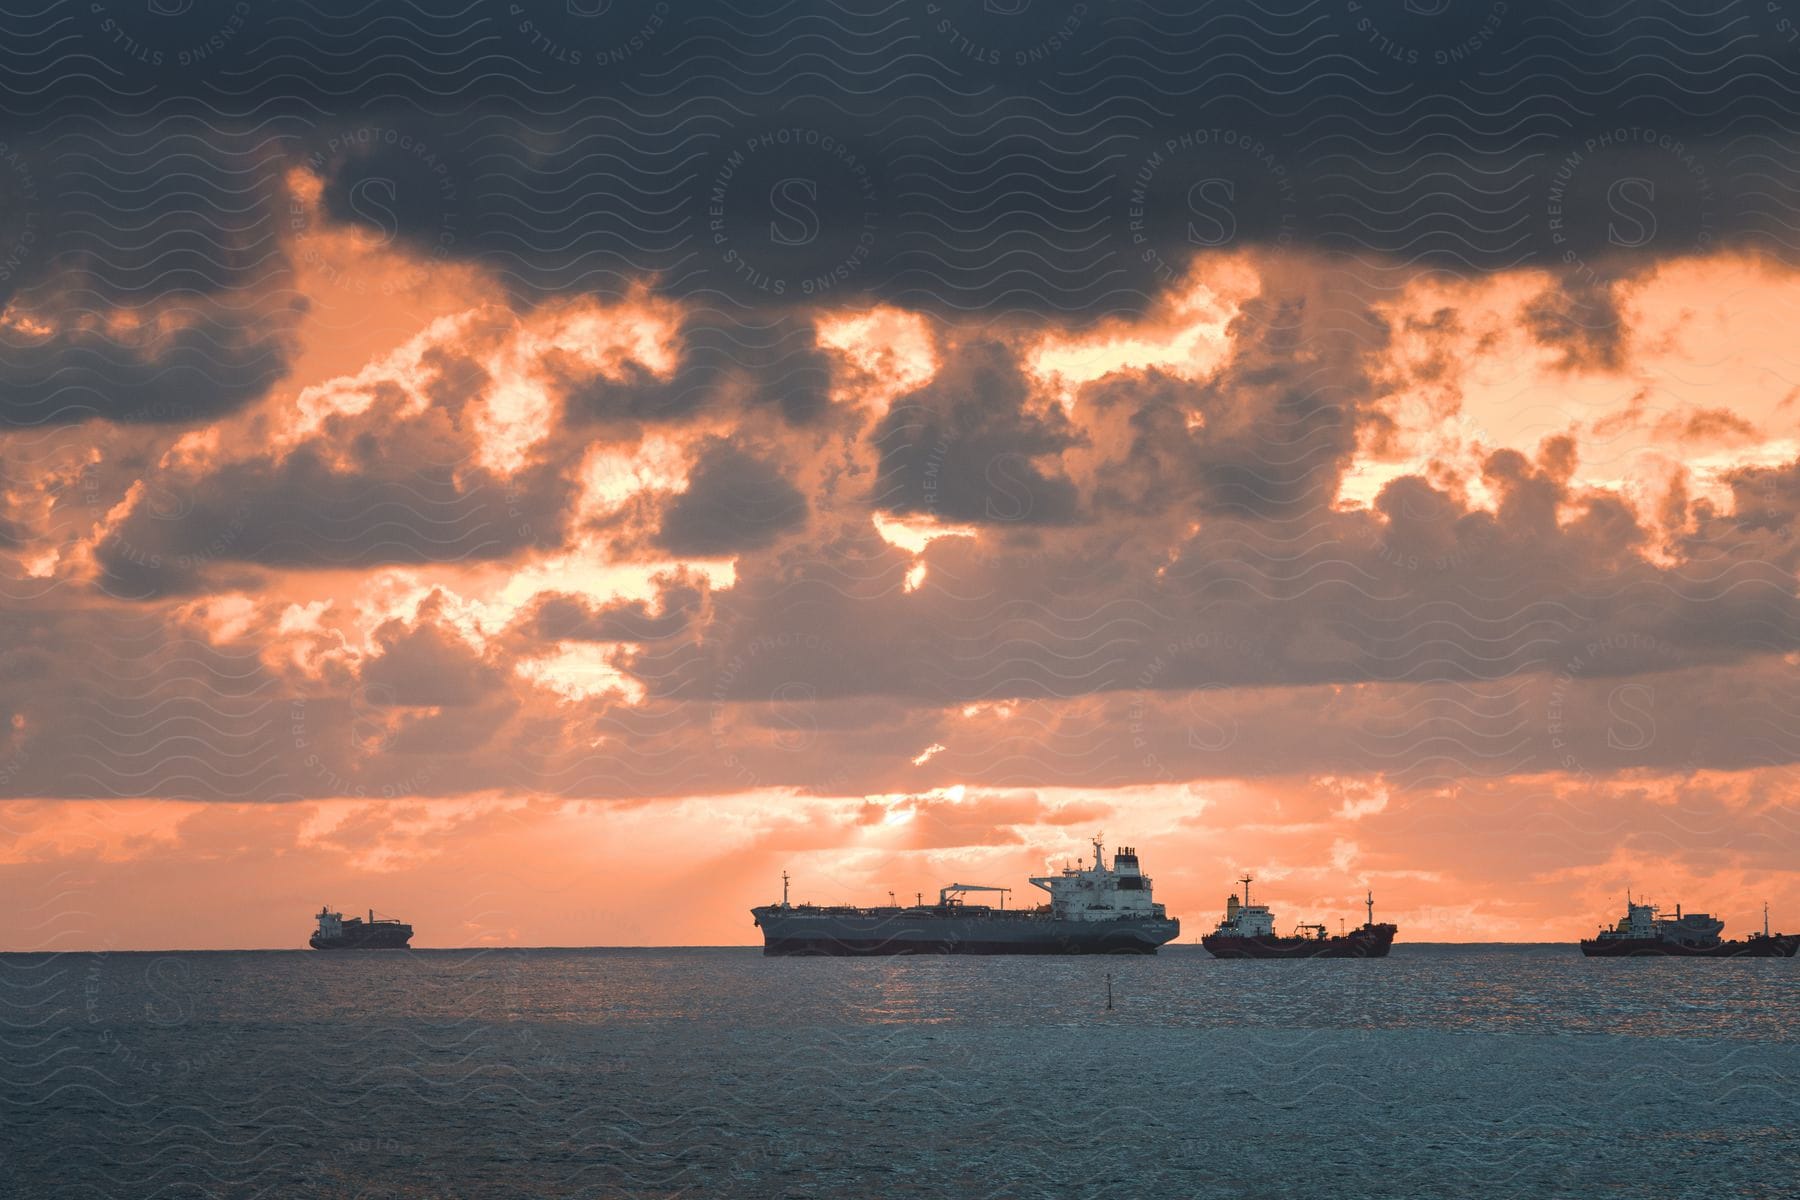 Cargo ships in the ocean at sunrise on a cloudy day